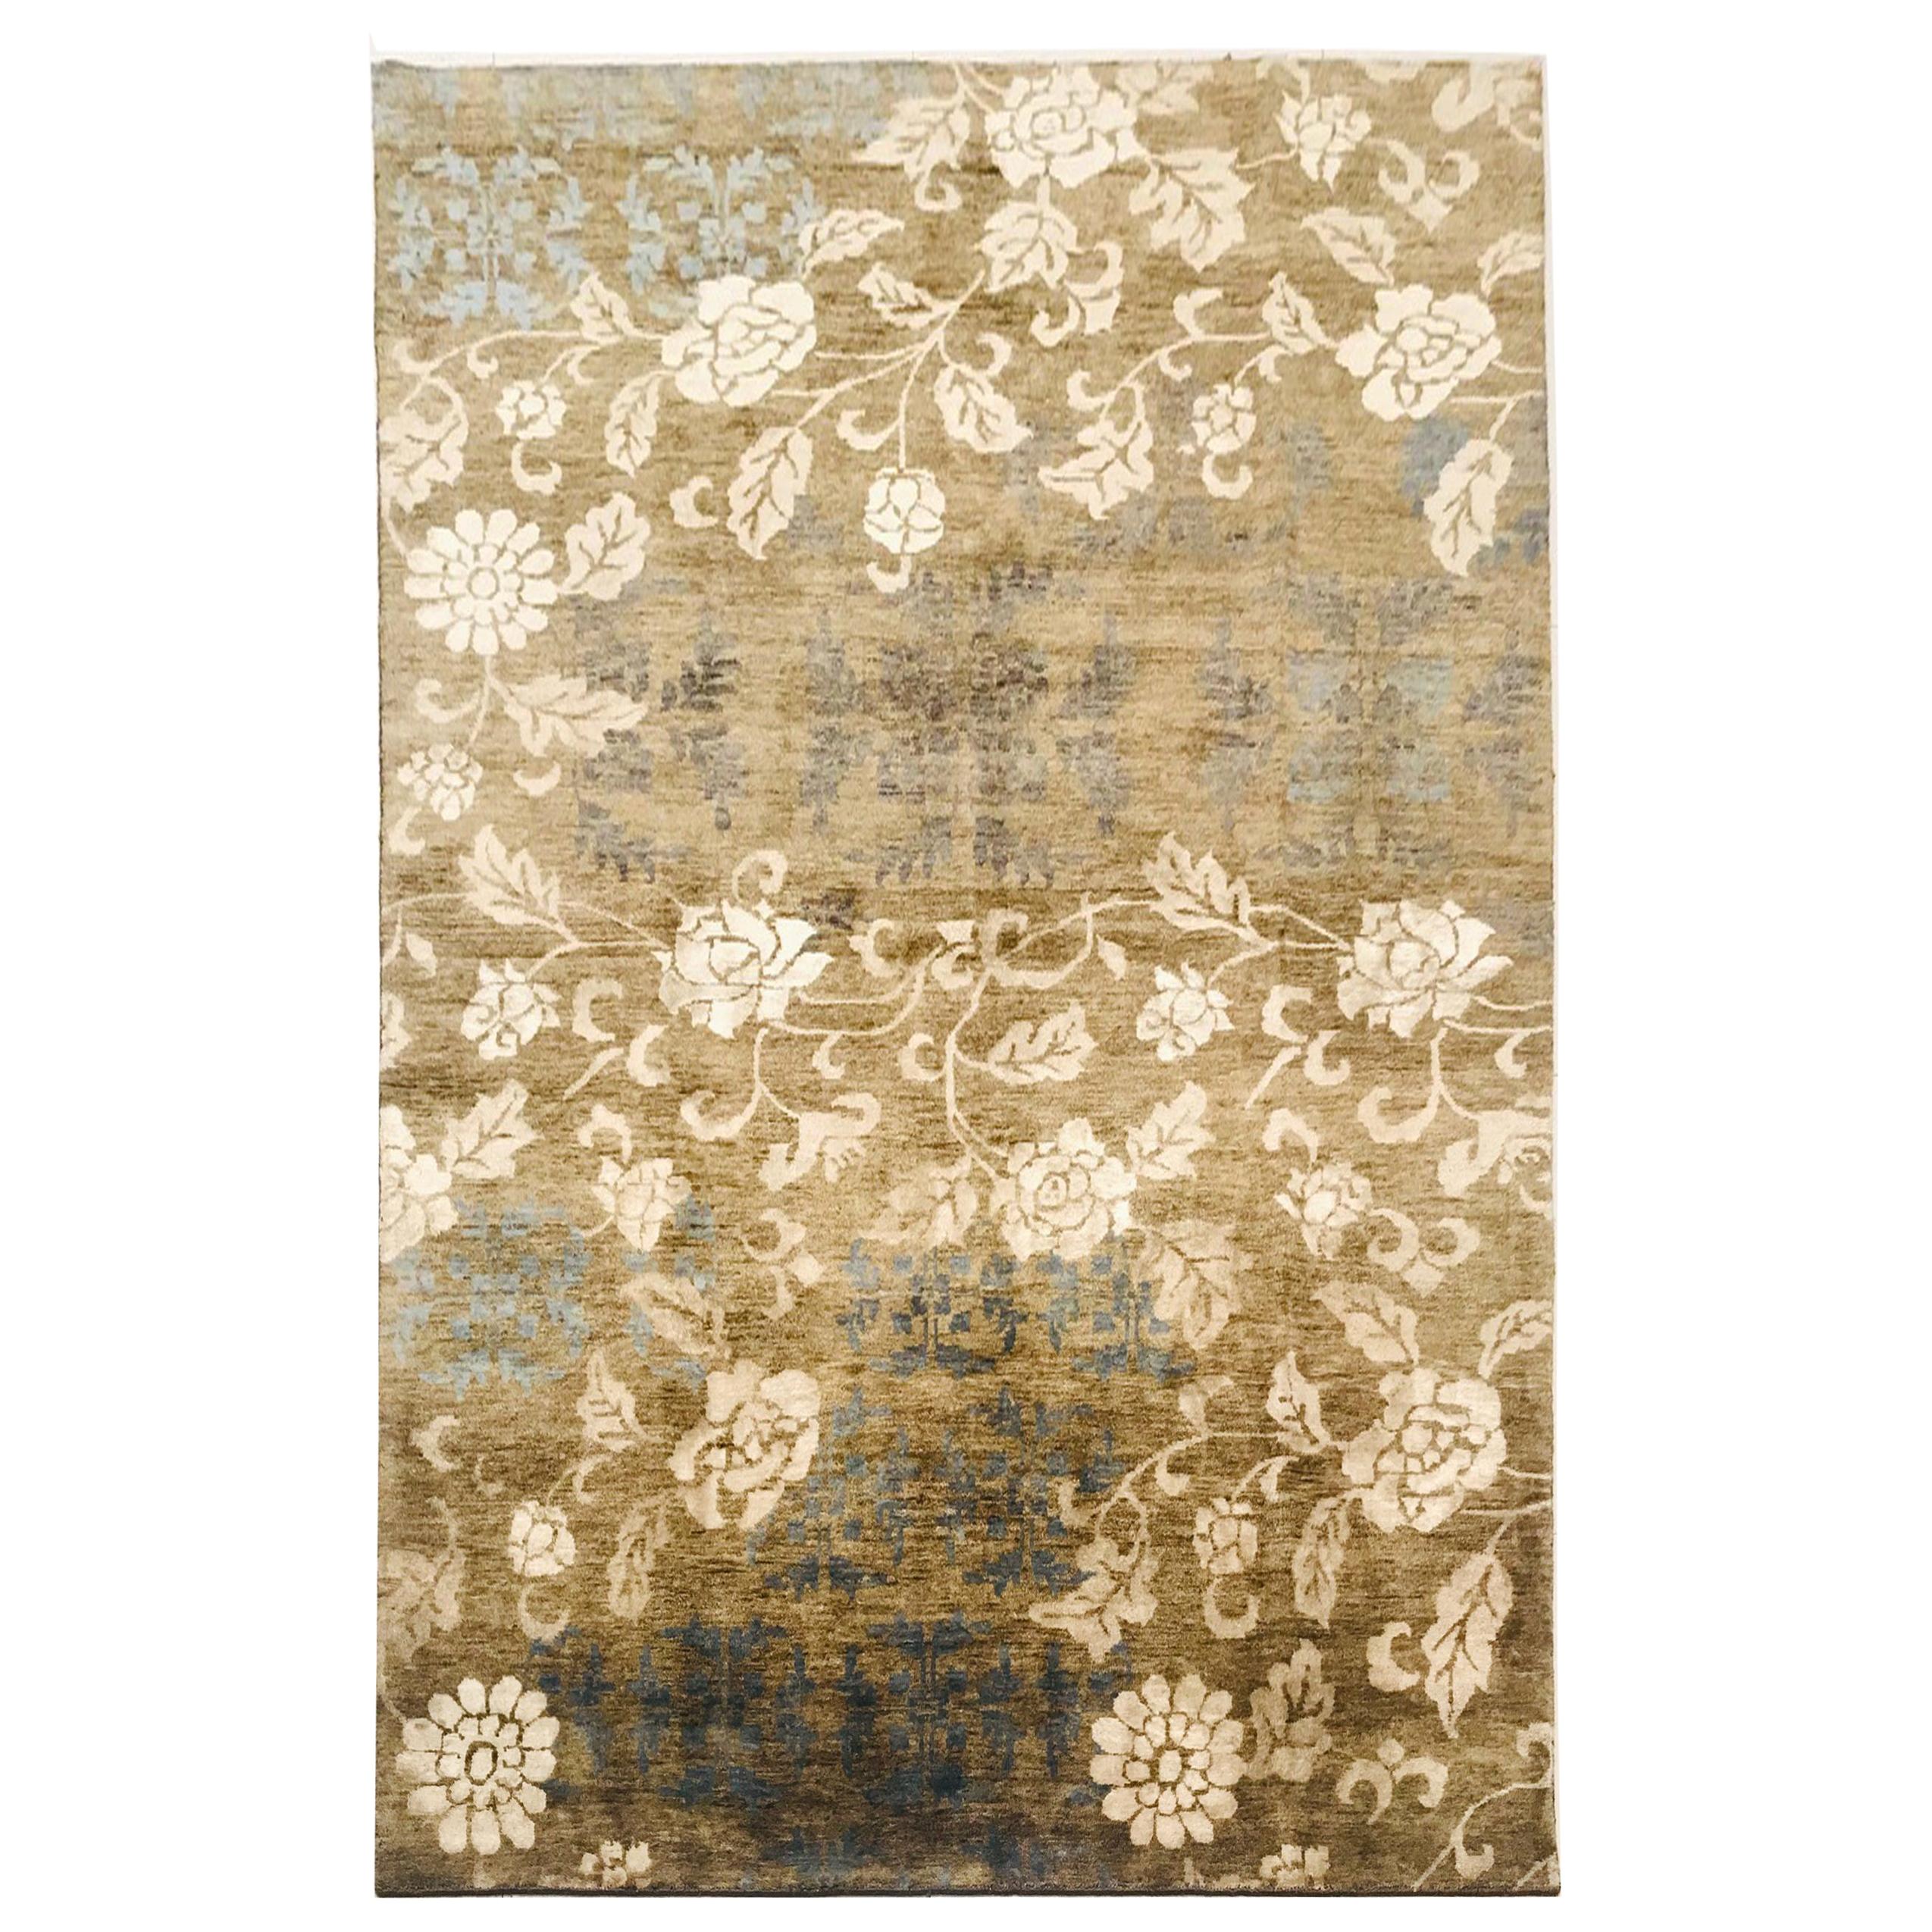 Late 20th Century Indian Wool Rug Hand Knotted in Beige with Olive Green Flowers For Sale